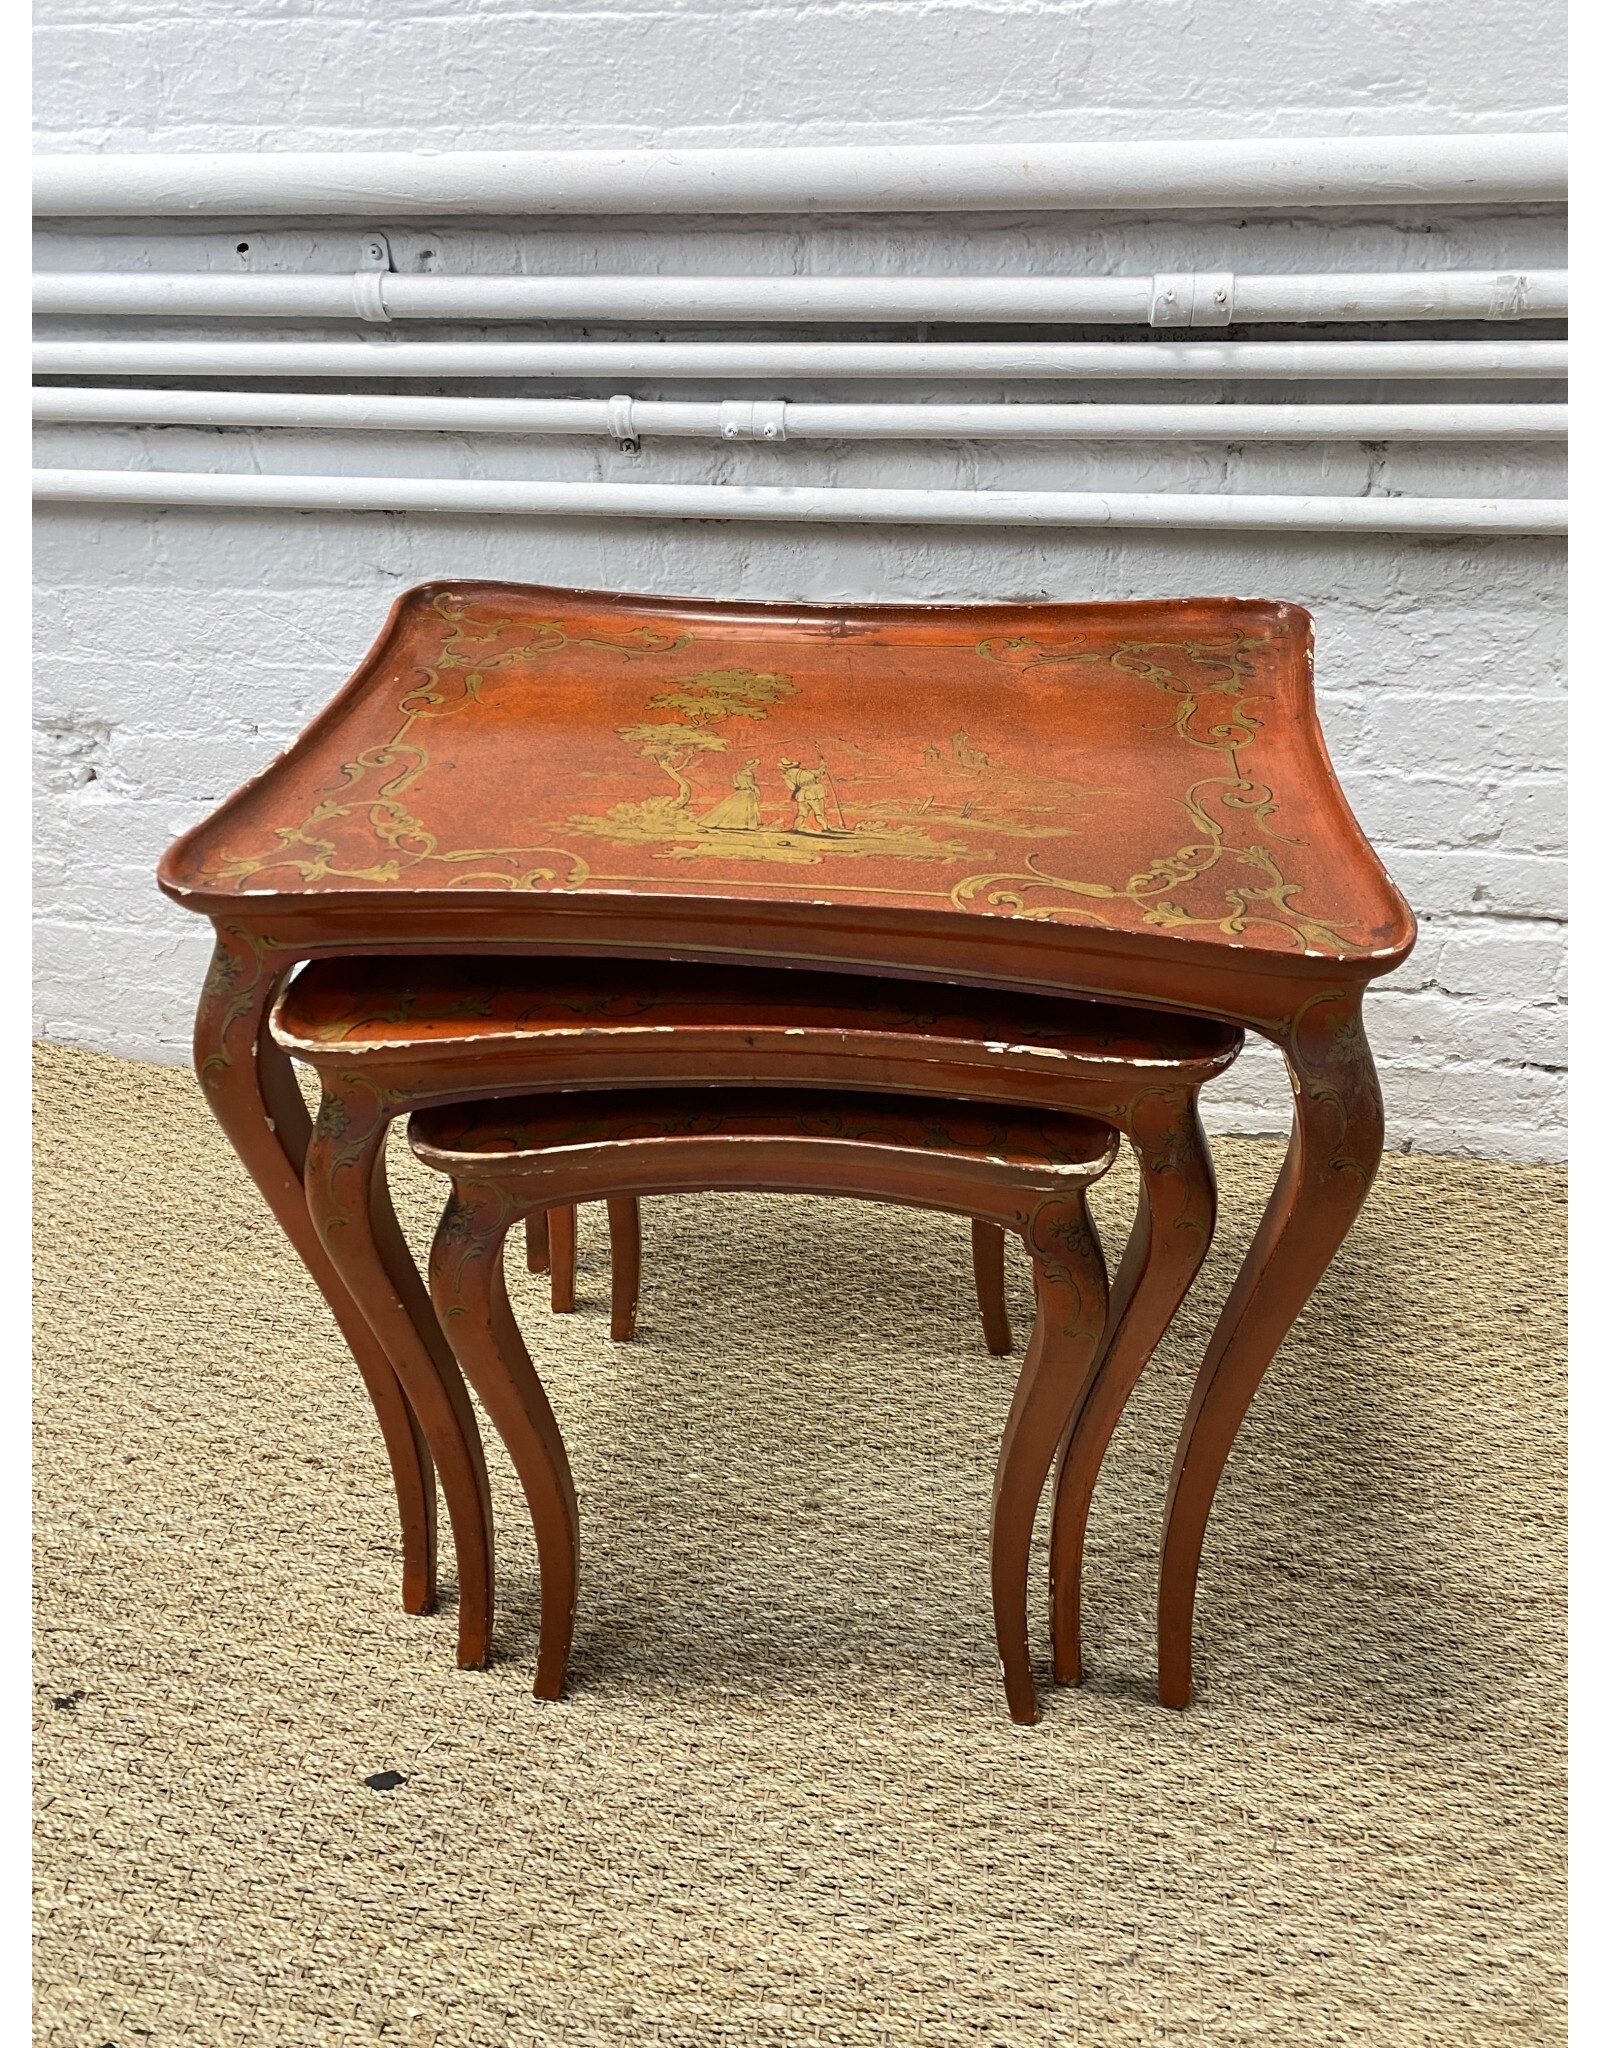 Vintage Style Decorative Red Nesting Table